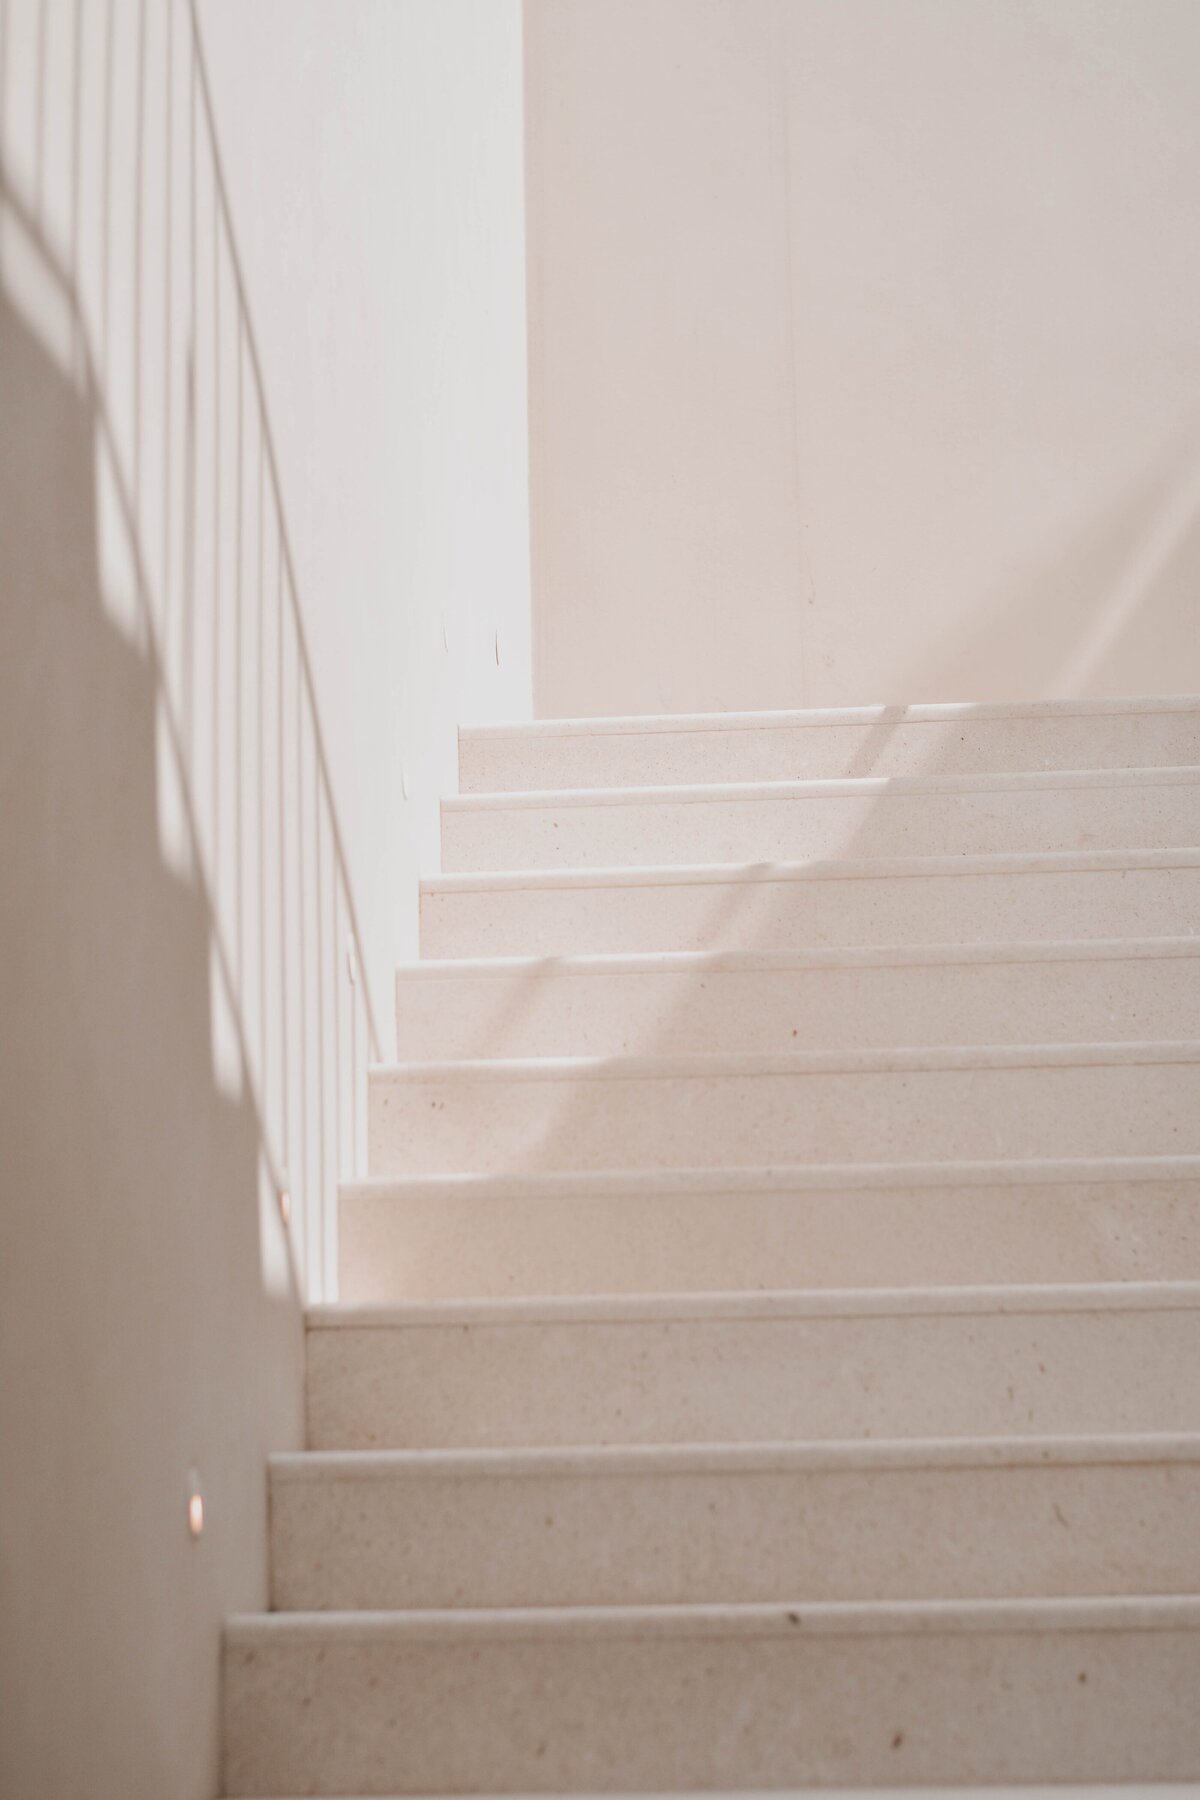 Light Directing on White Stairs